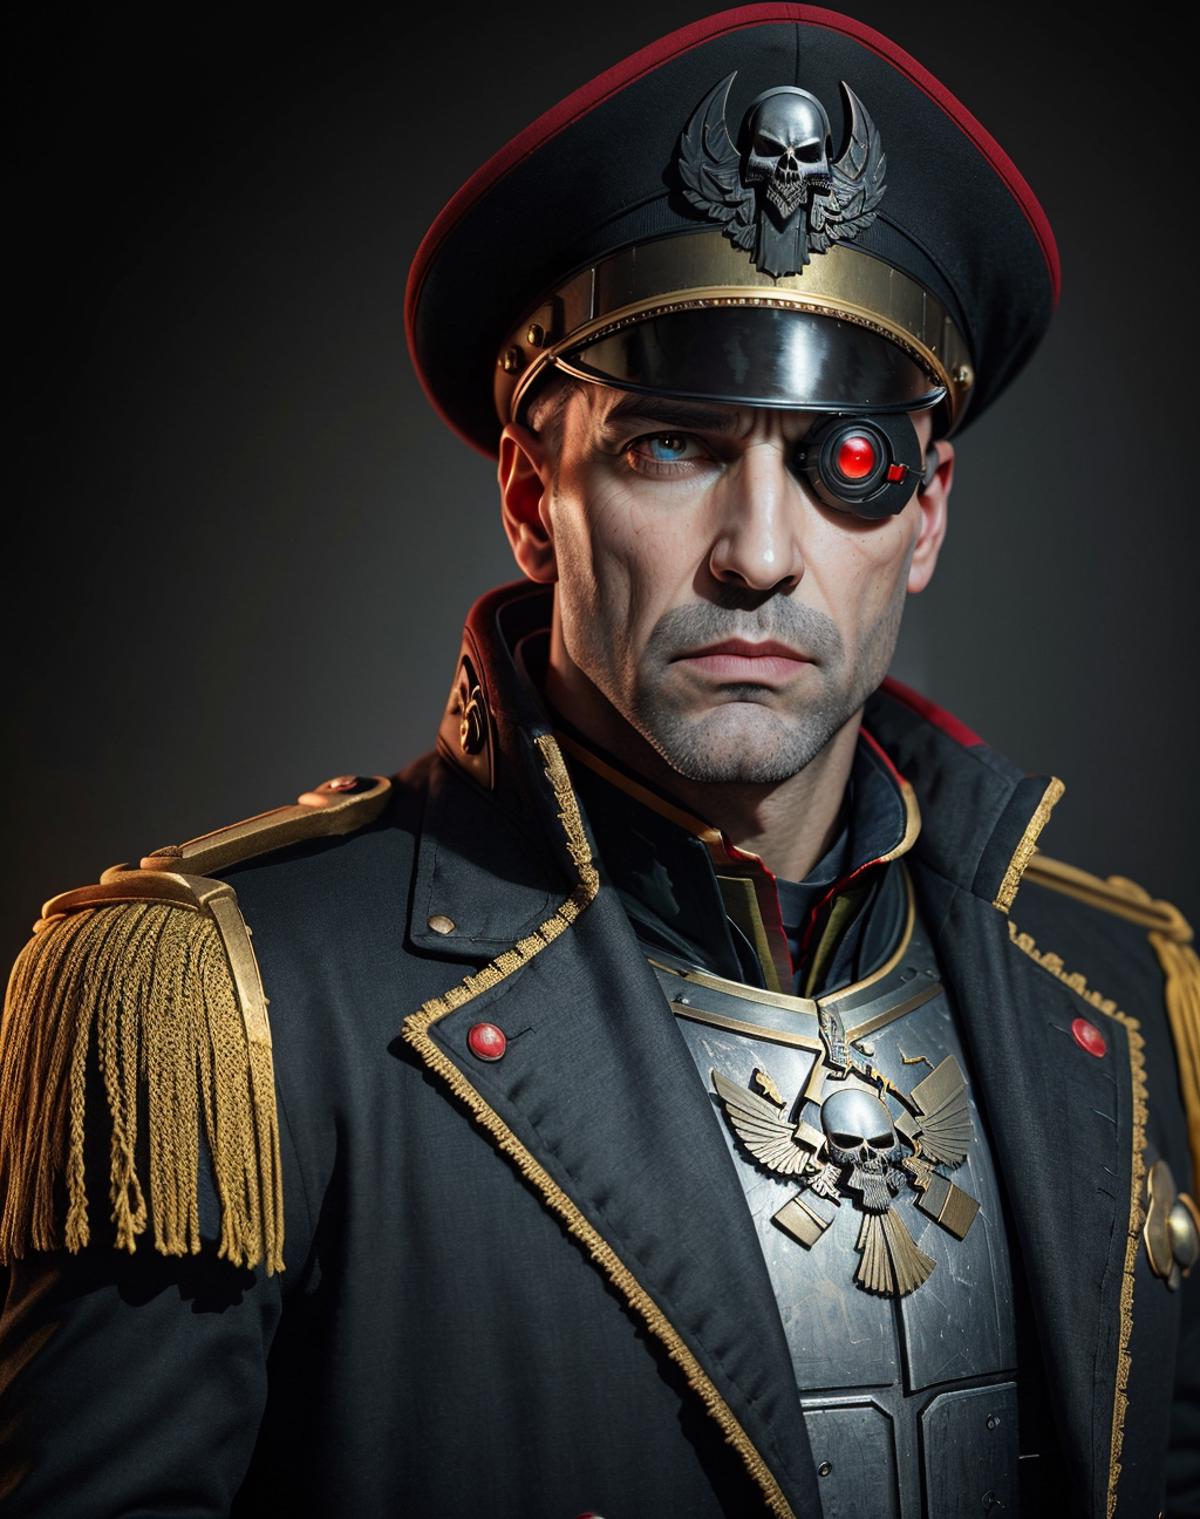 Warhammer 40K Commissar Outfit - by EDG image by EDG